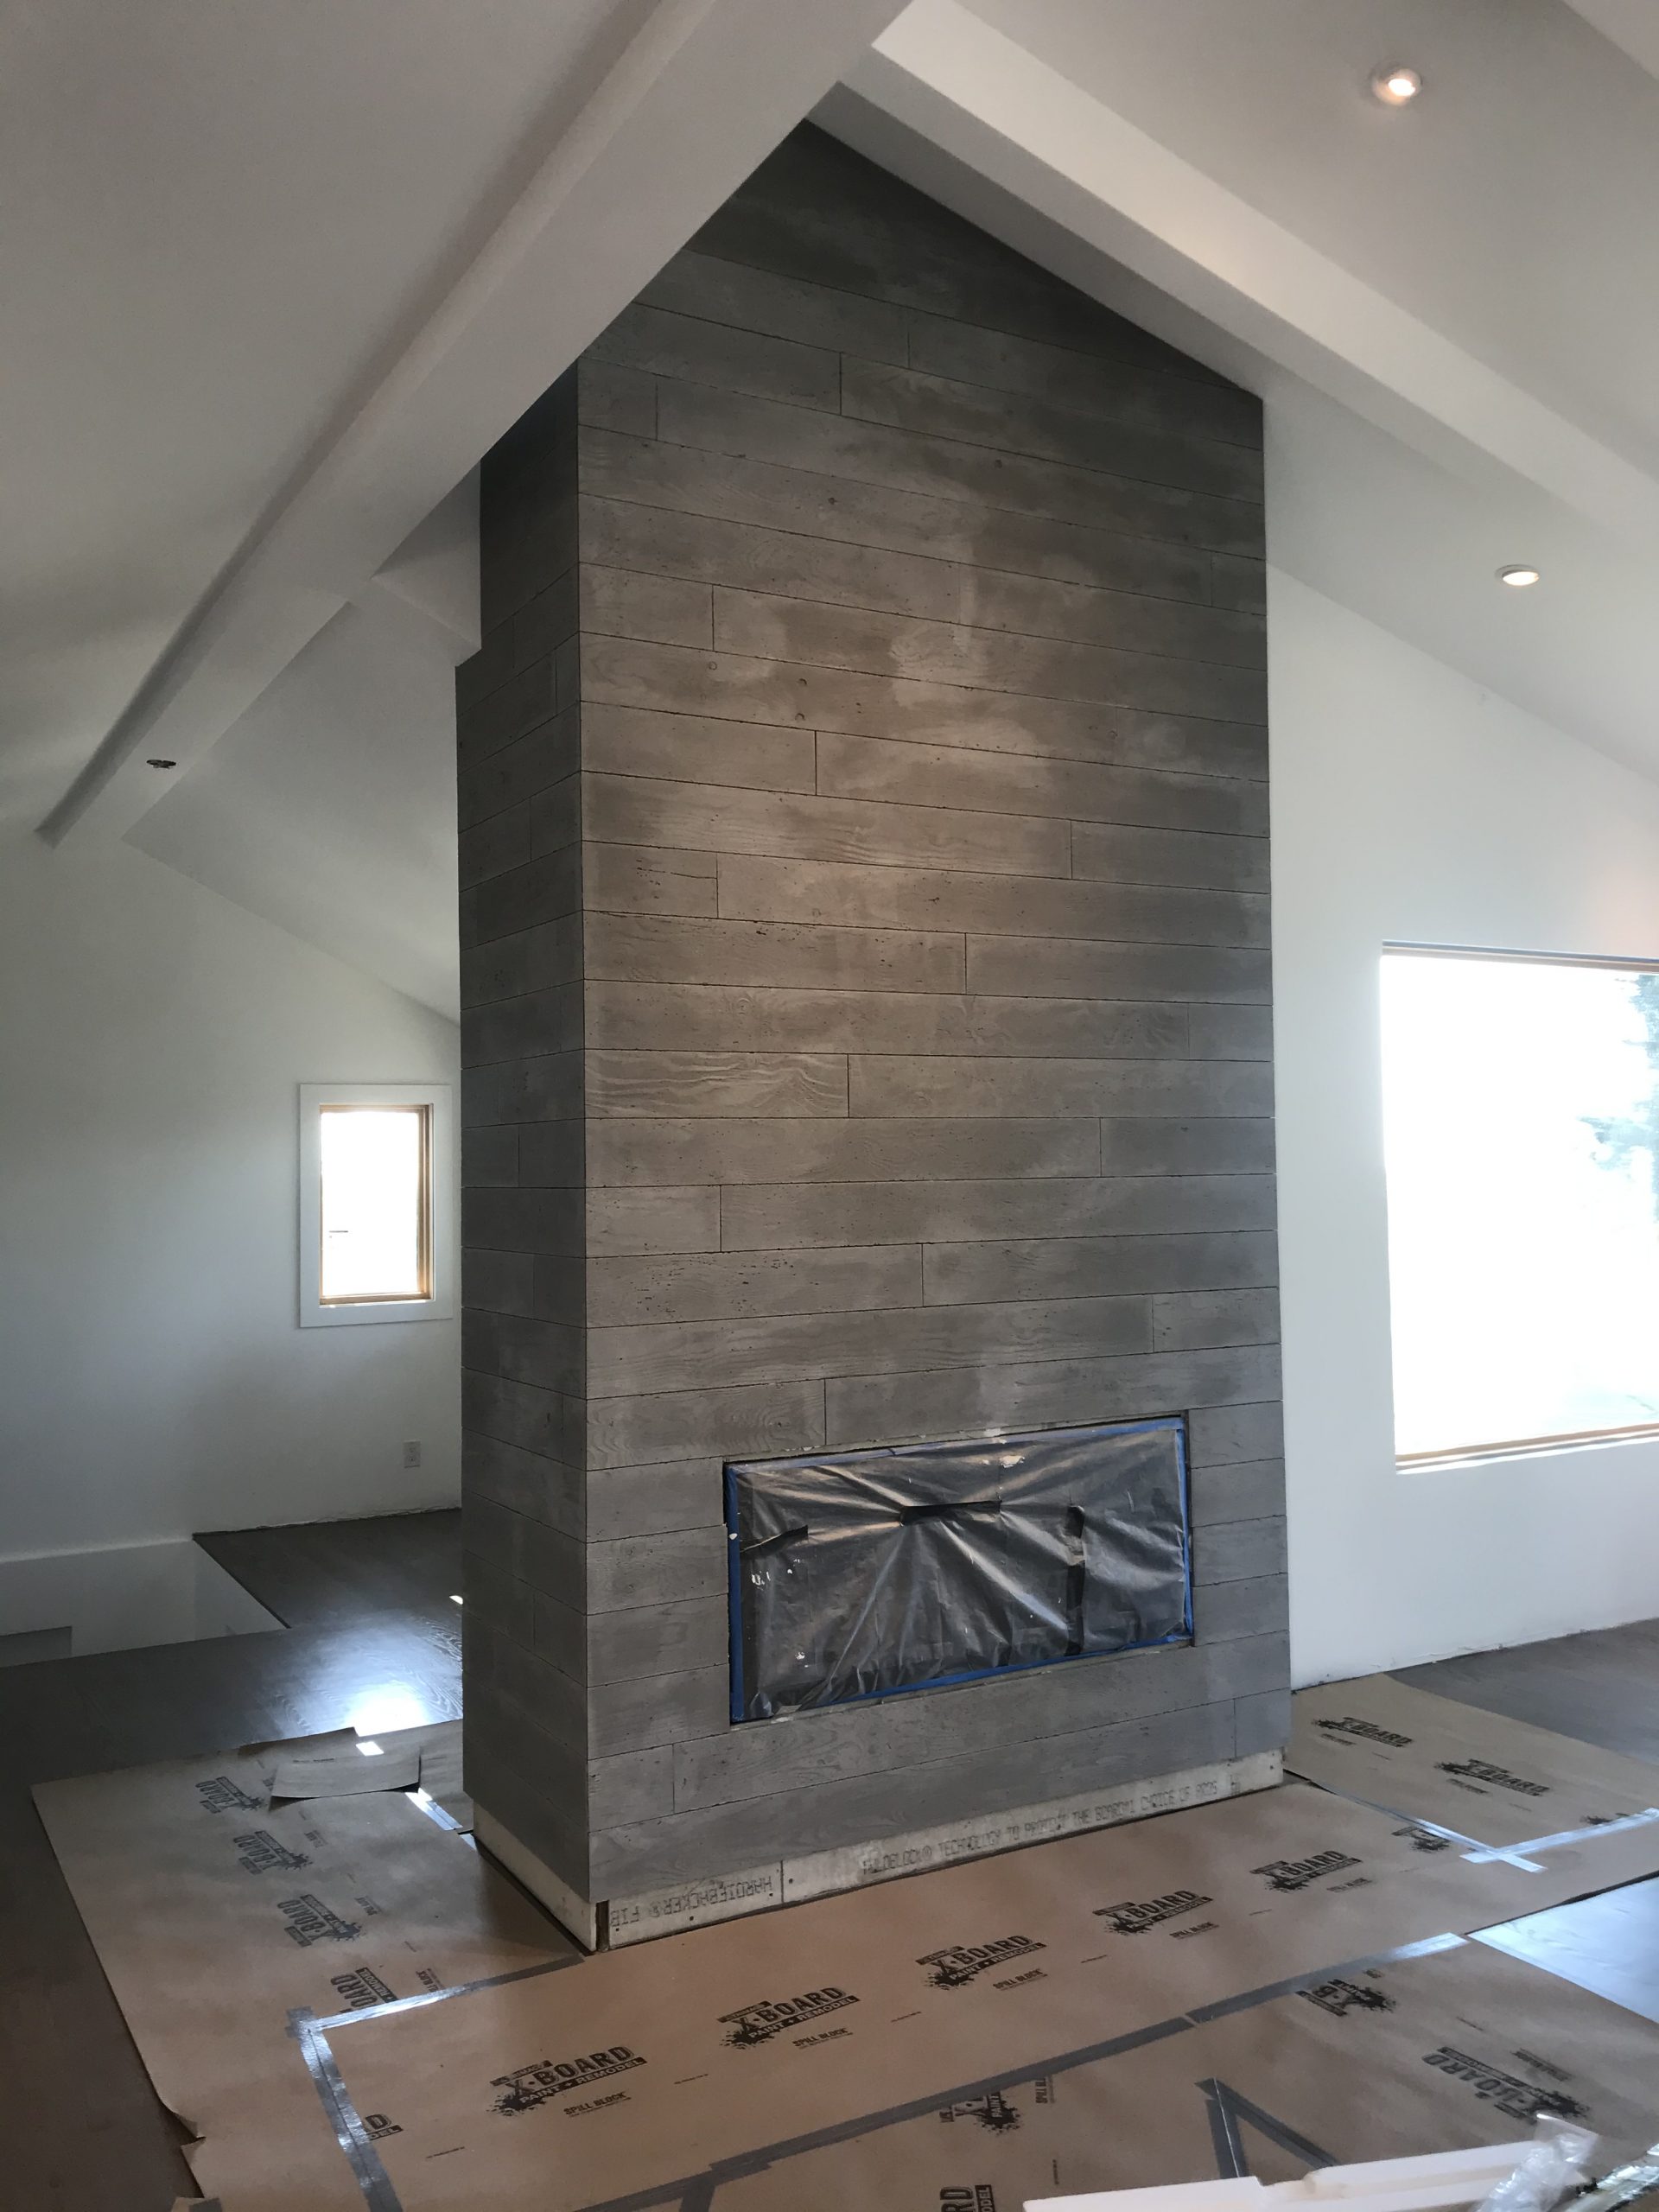 Rental unit with concrete board chimney